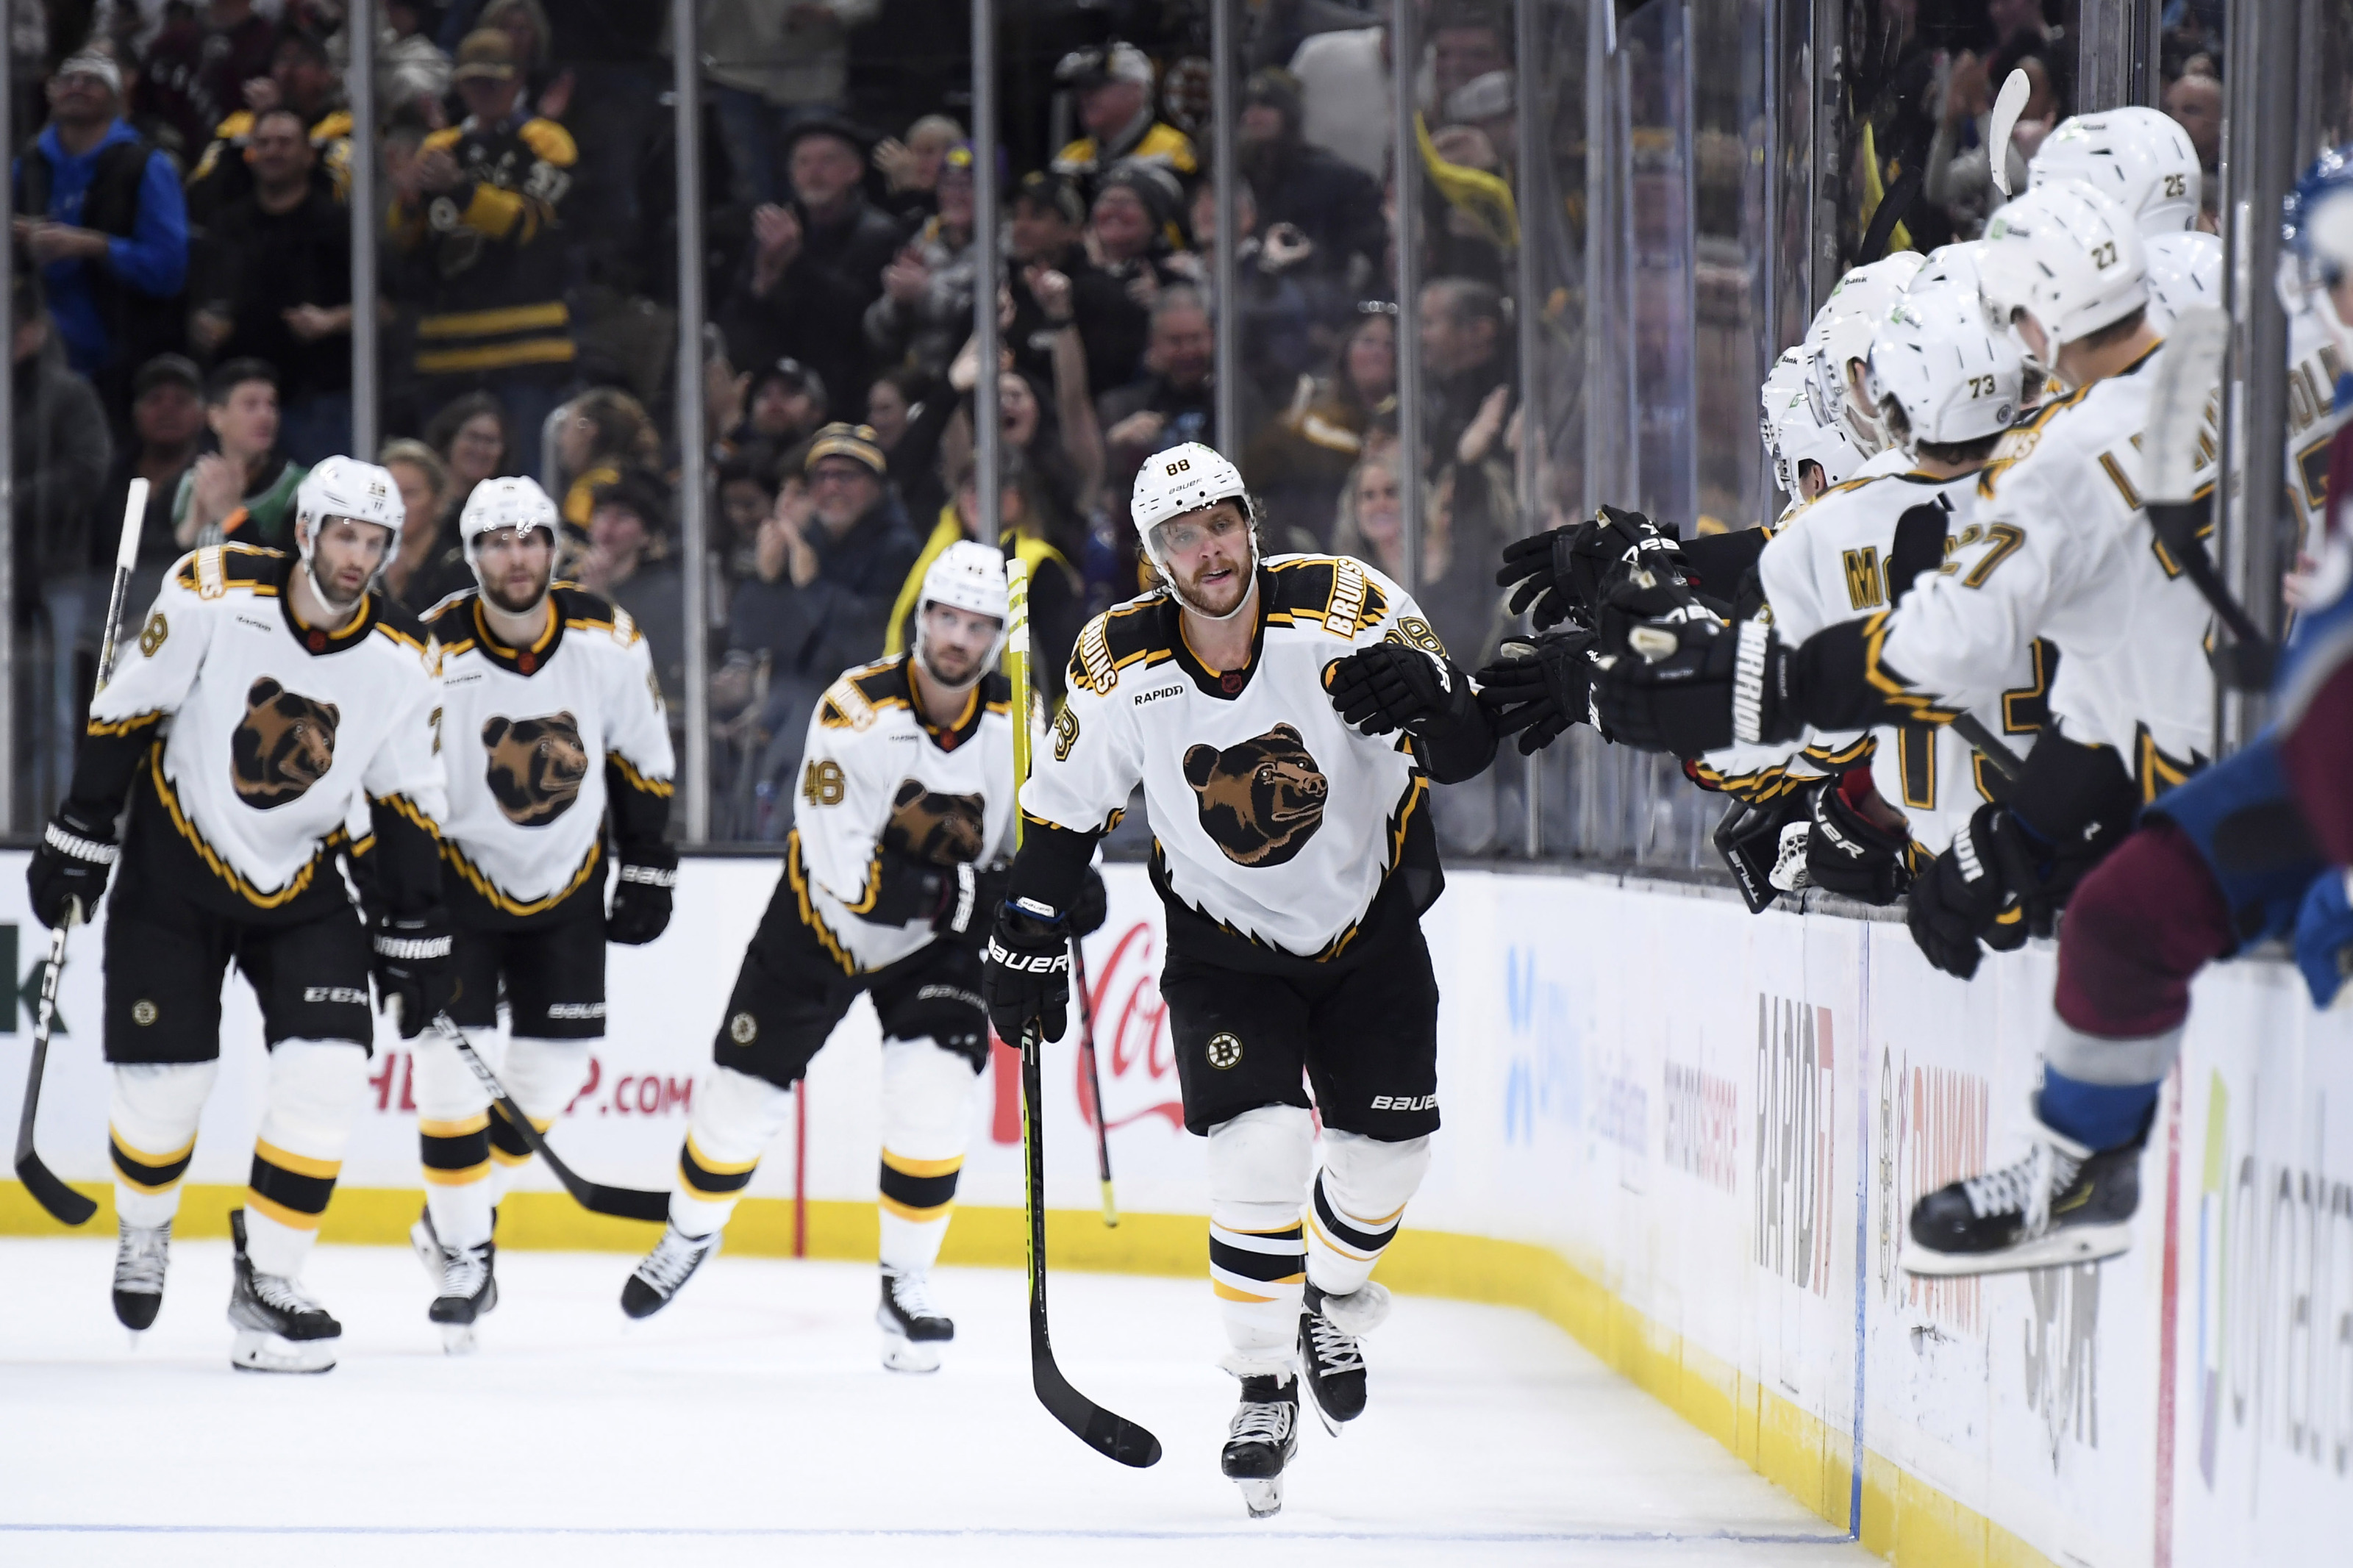 Bruins improve to record 14-0 at home, beat Avalanche 5-1 - Seattle Sports